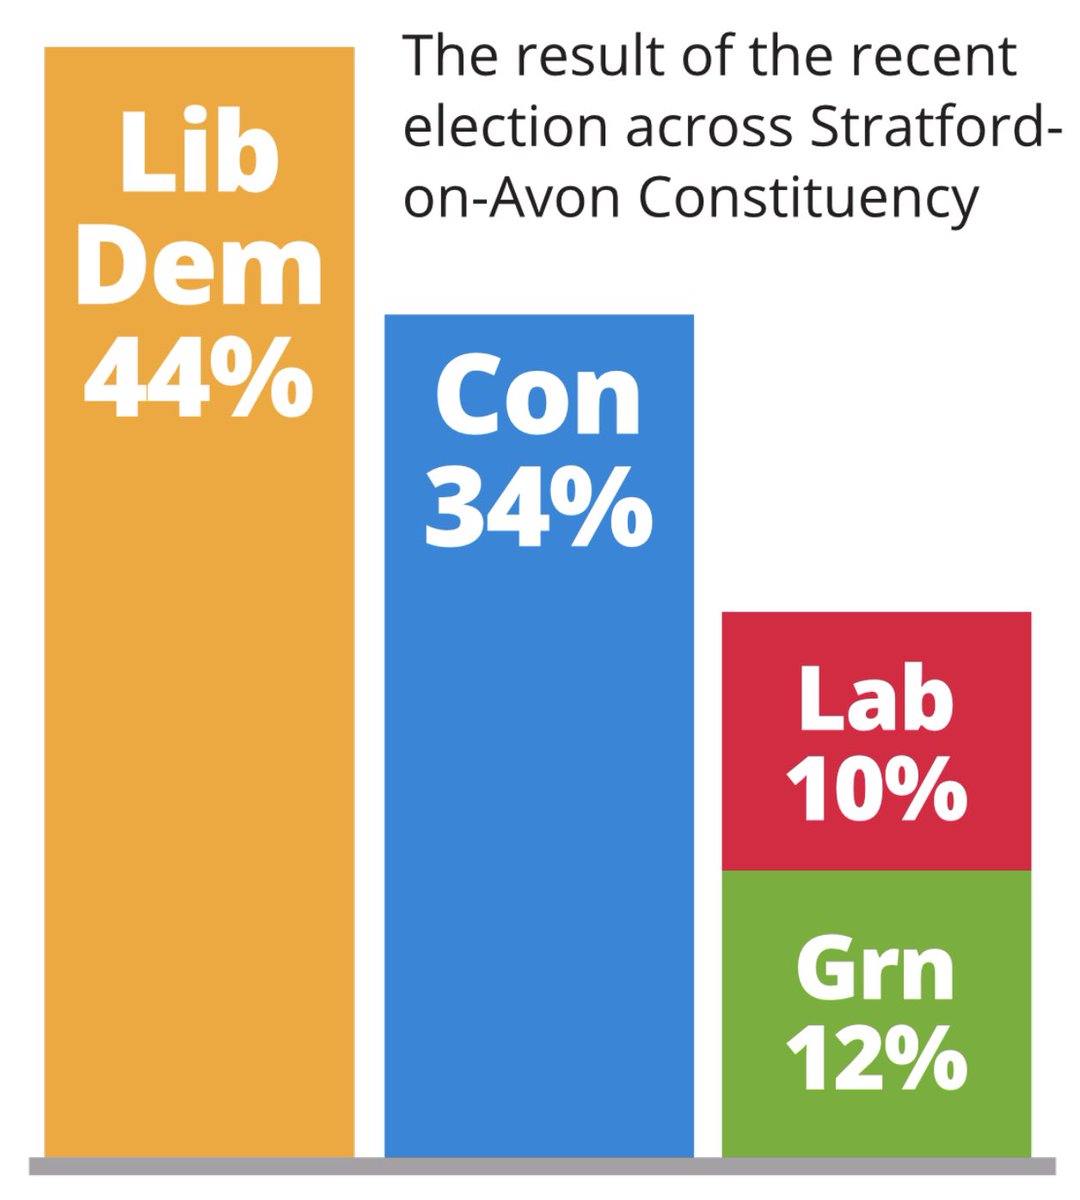 @StratfordLabour There’s no Labour here in Stratford! The Lib Dems took control of Stratford on Avon District Council last May. Labour won zero seats. The Lib Dems have already beaten the Tories here once, and we are the only party who can do it again on 4th July!